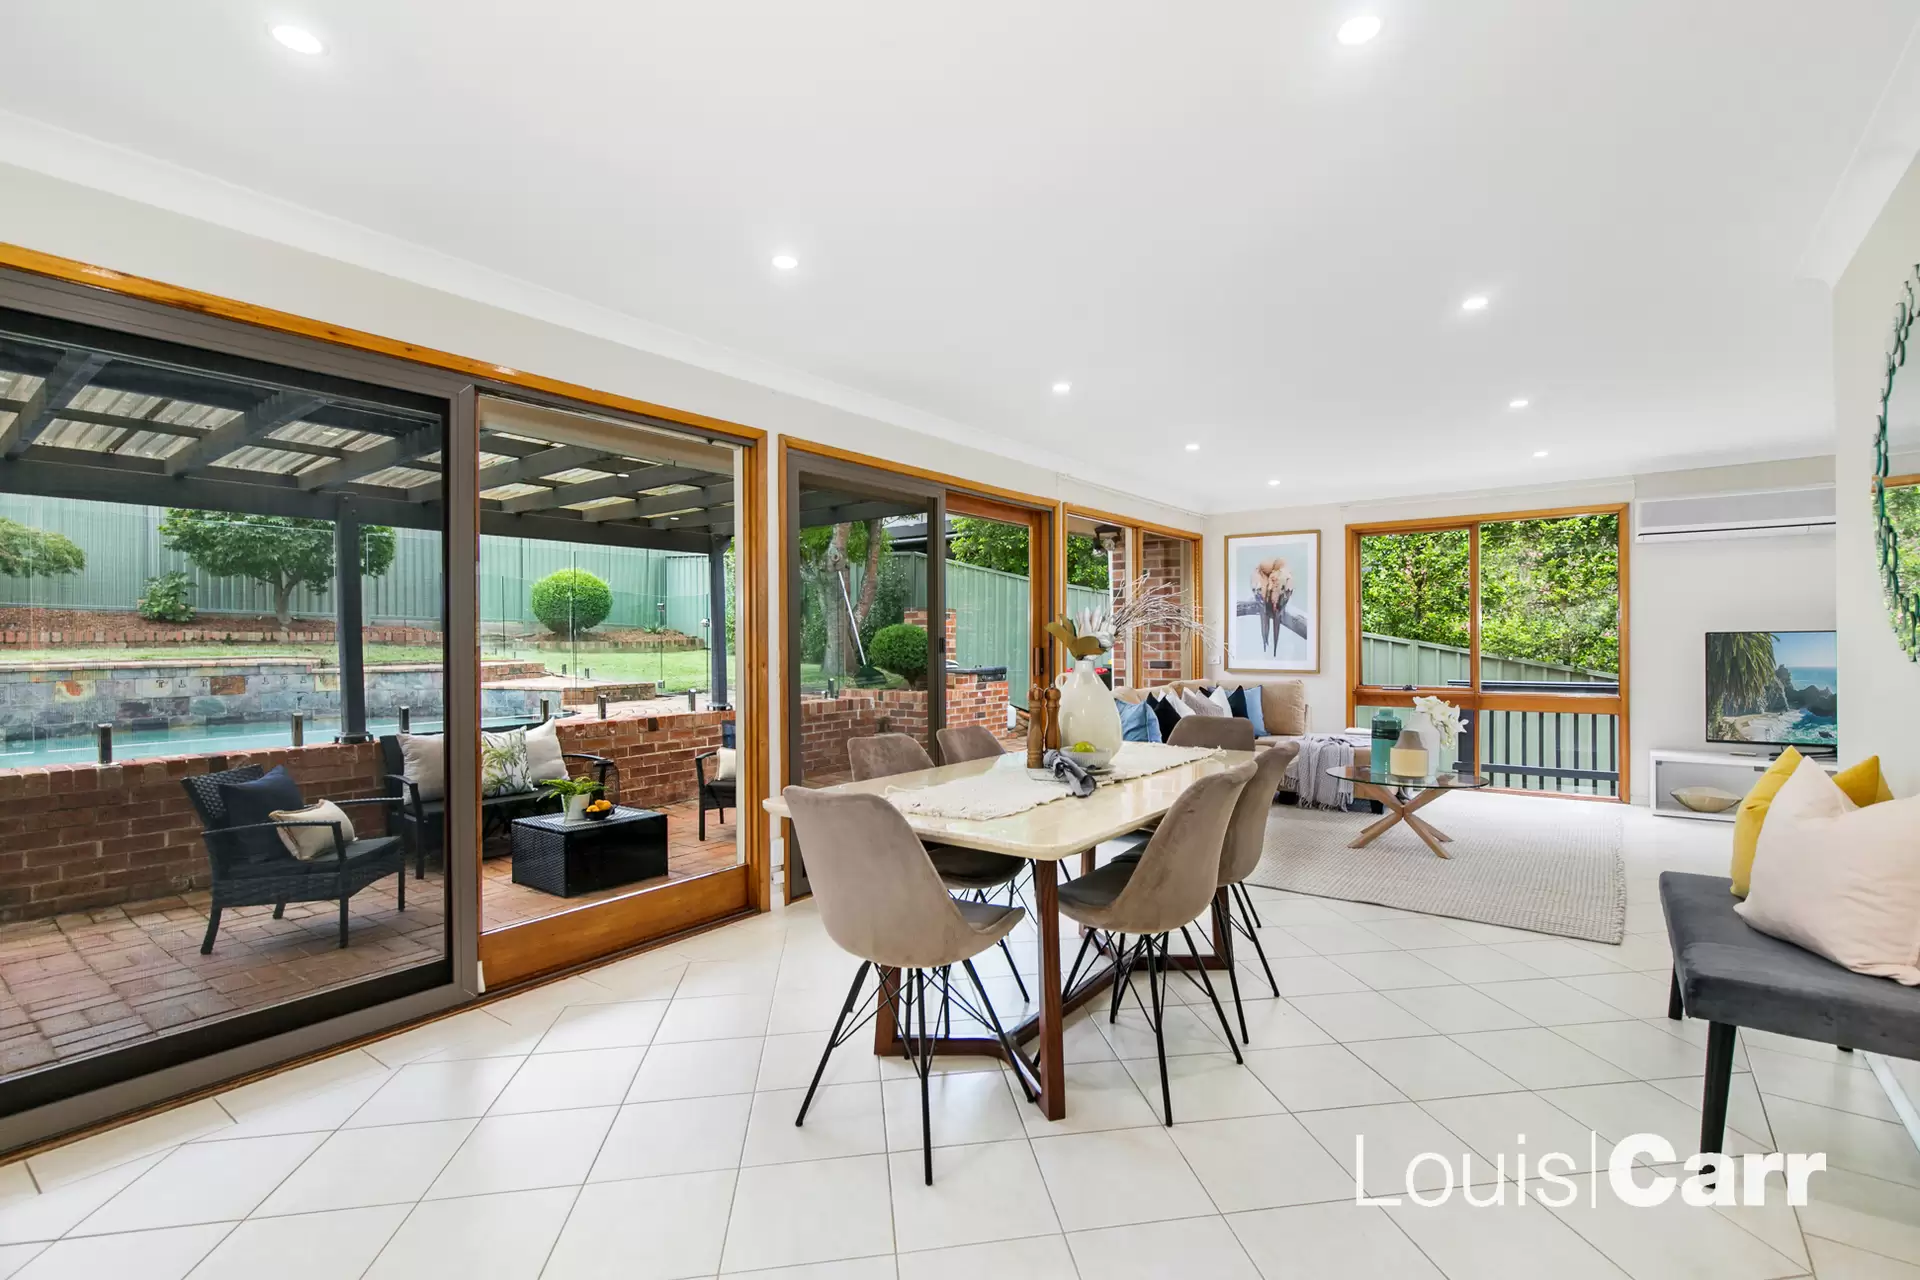 Photo #7: 165 Shepherds Drive, Cherrybrook - Auction by Louis Carr Real Estate